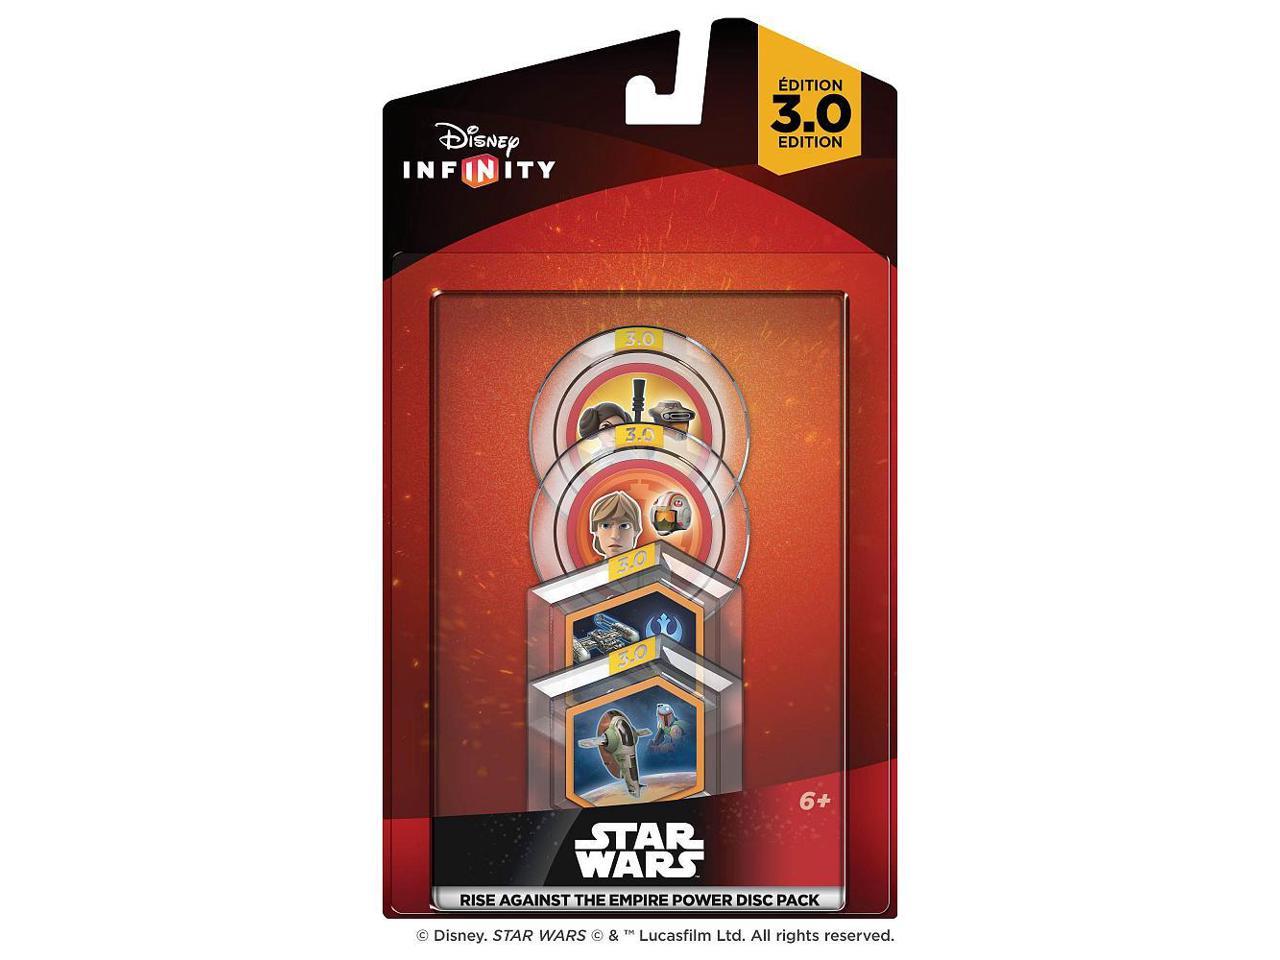 Disney Infinity 3.0 Edition: Star Wars Rise Against the Empire Power Disc Pack - image 1 of 4